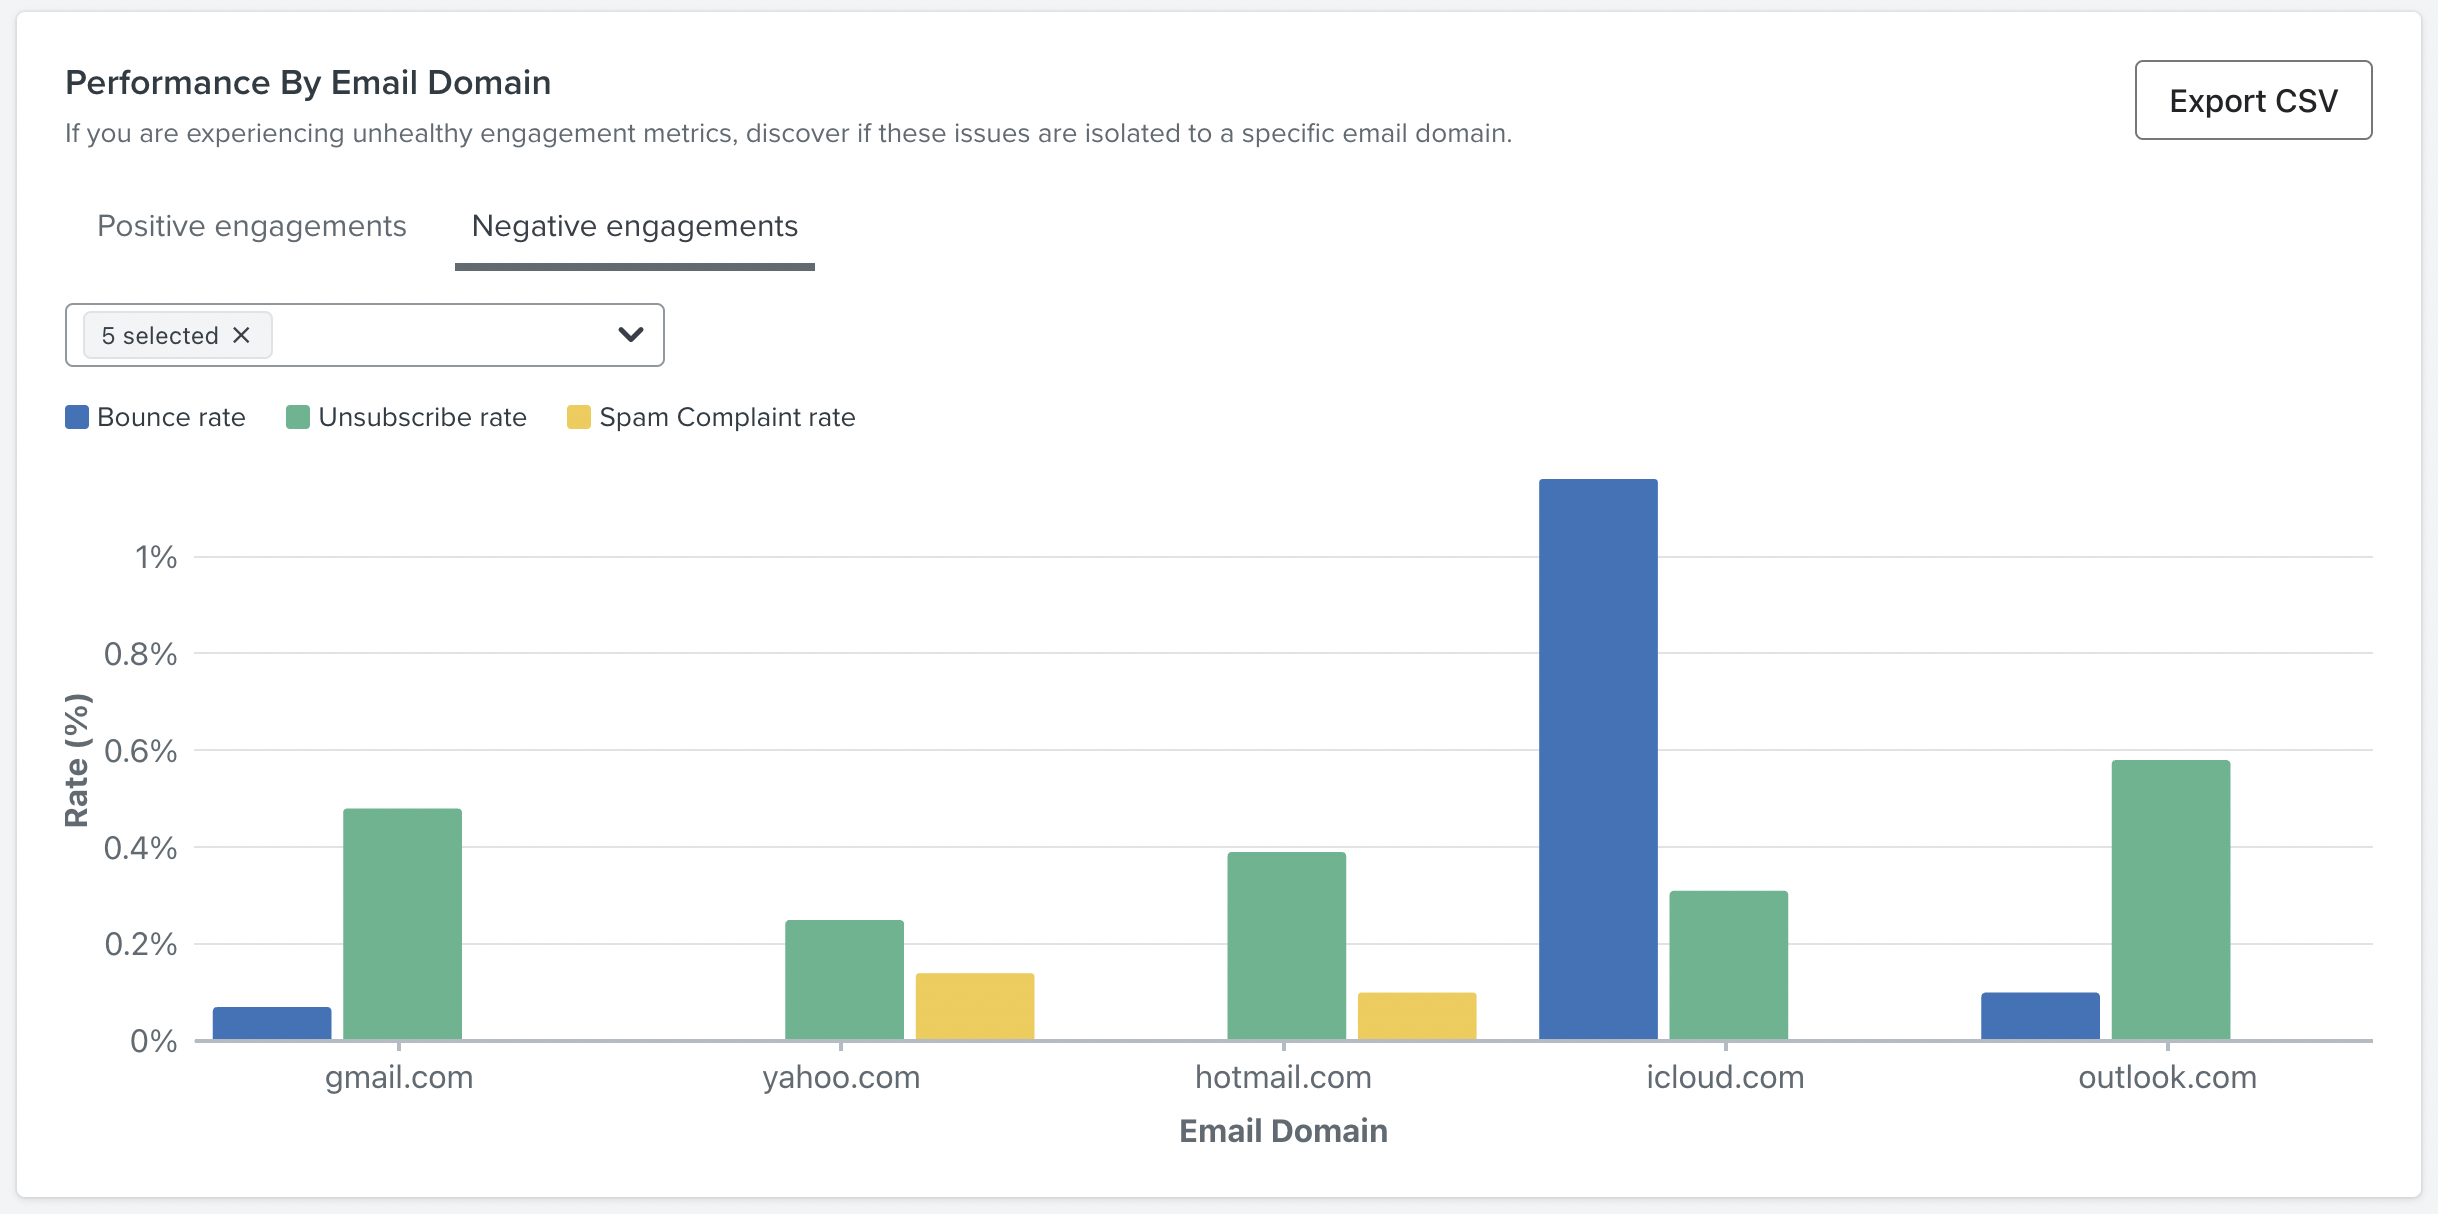 Performance by email domain showing negative enagegments